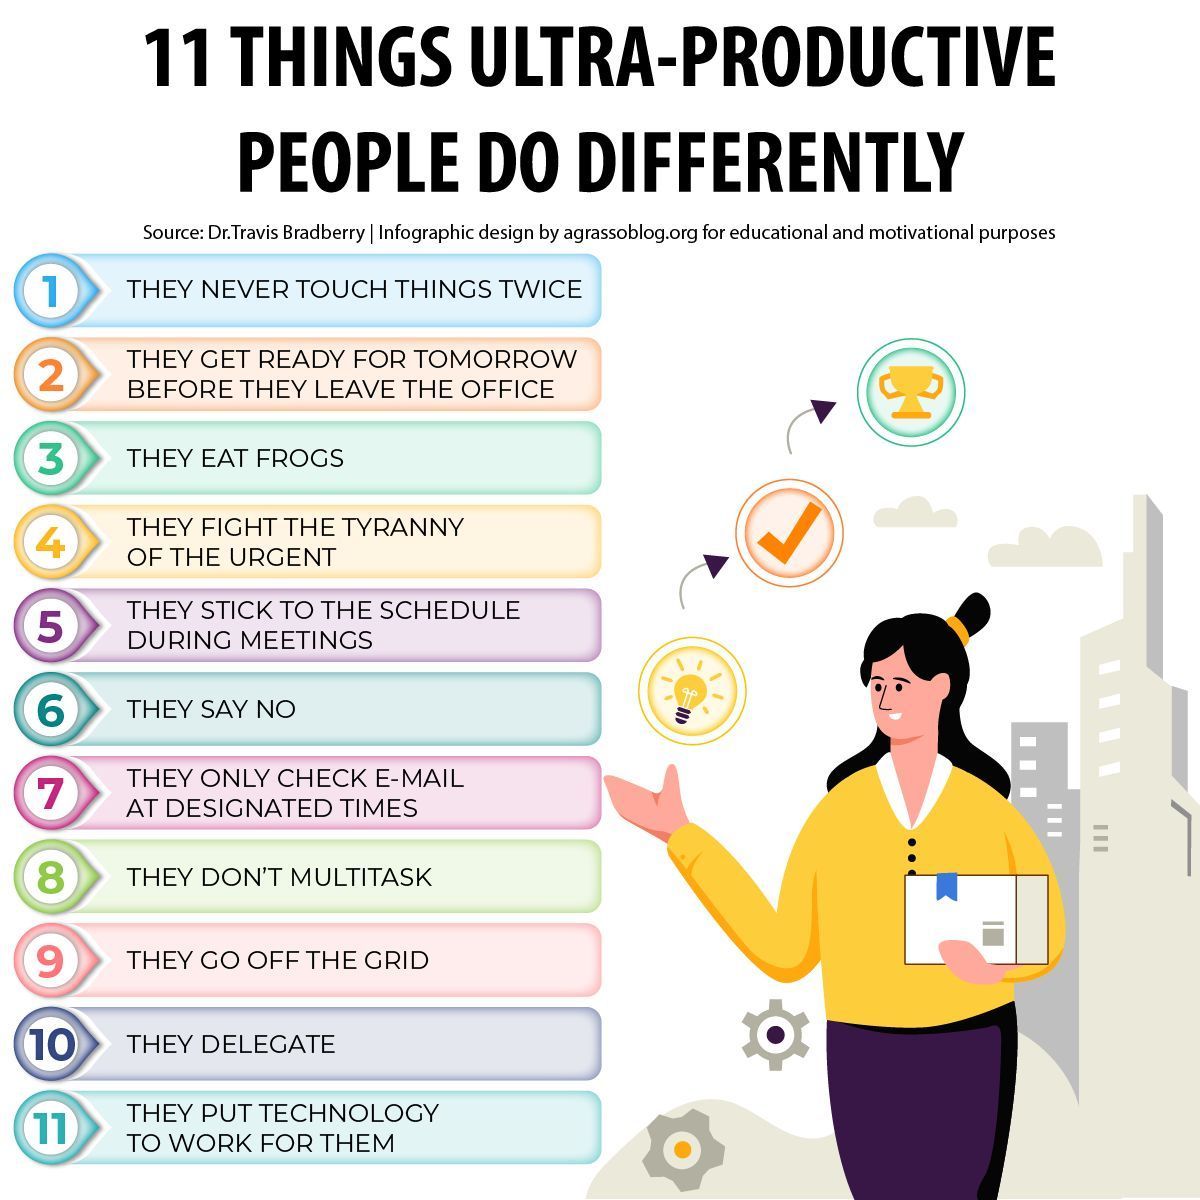 Ultra-productive people master time management, prioritize tasks meticulously, maintain focus, exhibit self-discipline, embrace a growth mindset, and consistently seek optimization. Here are 11 things they do differently. #Productivity #Strategy #PersonalGrowth